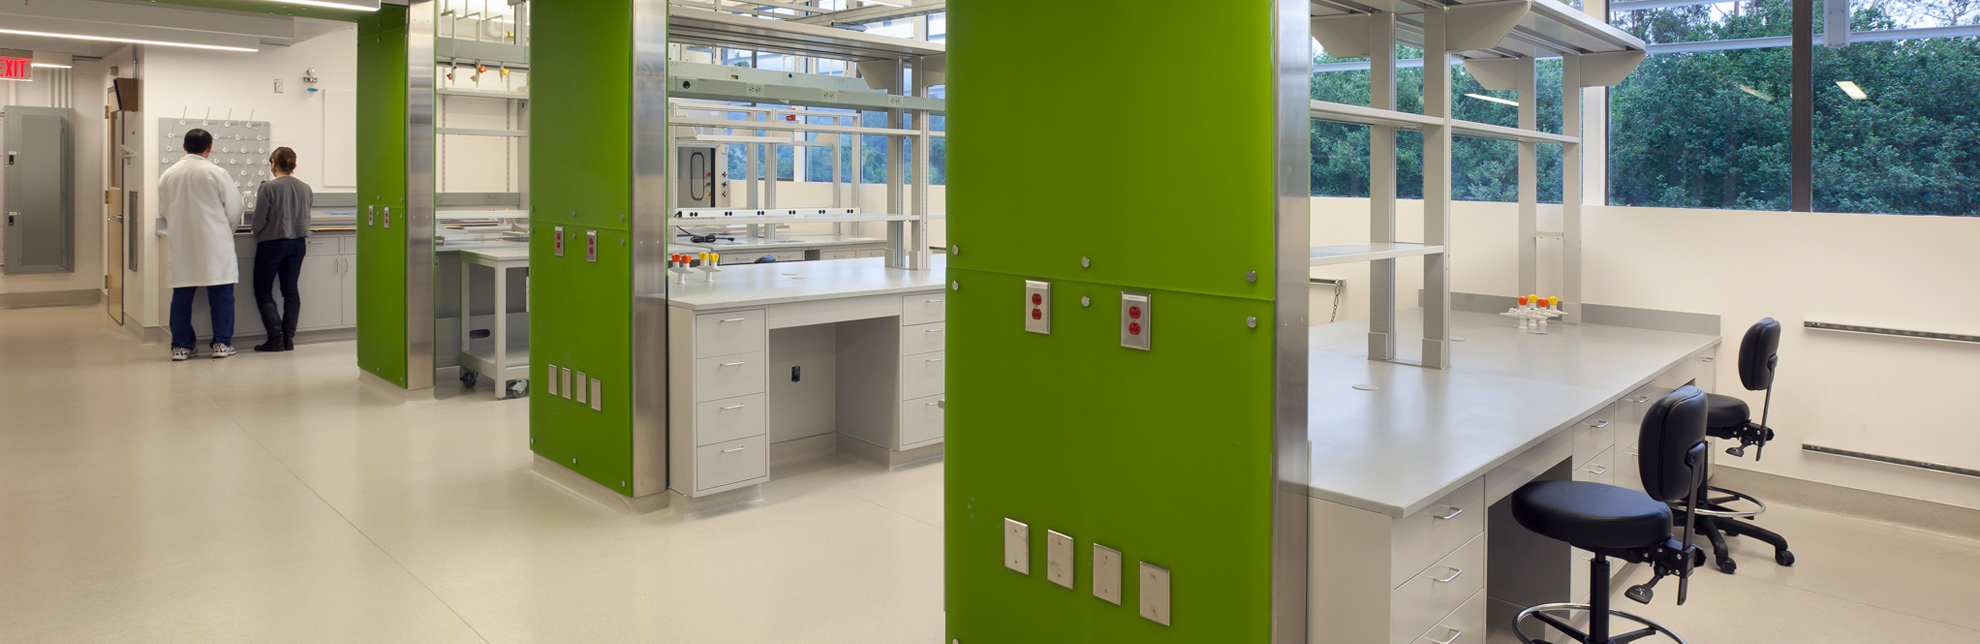 Installation of laboratory and clean room facilities